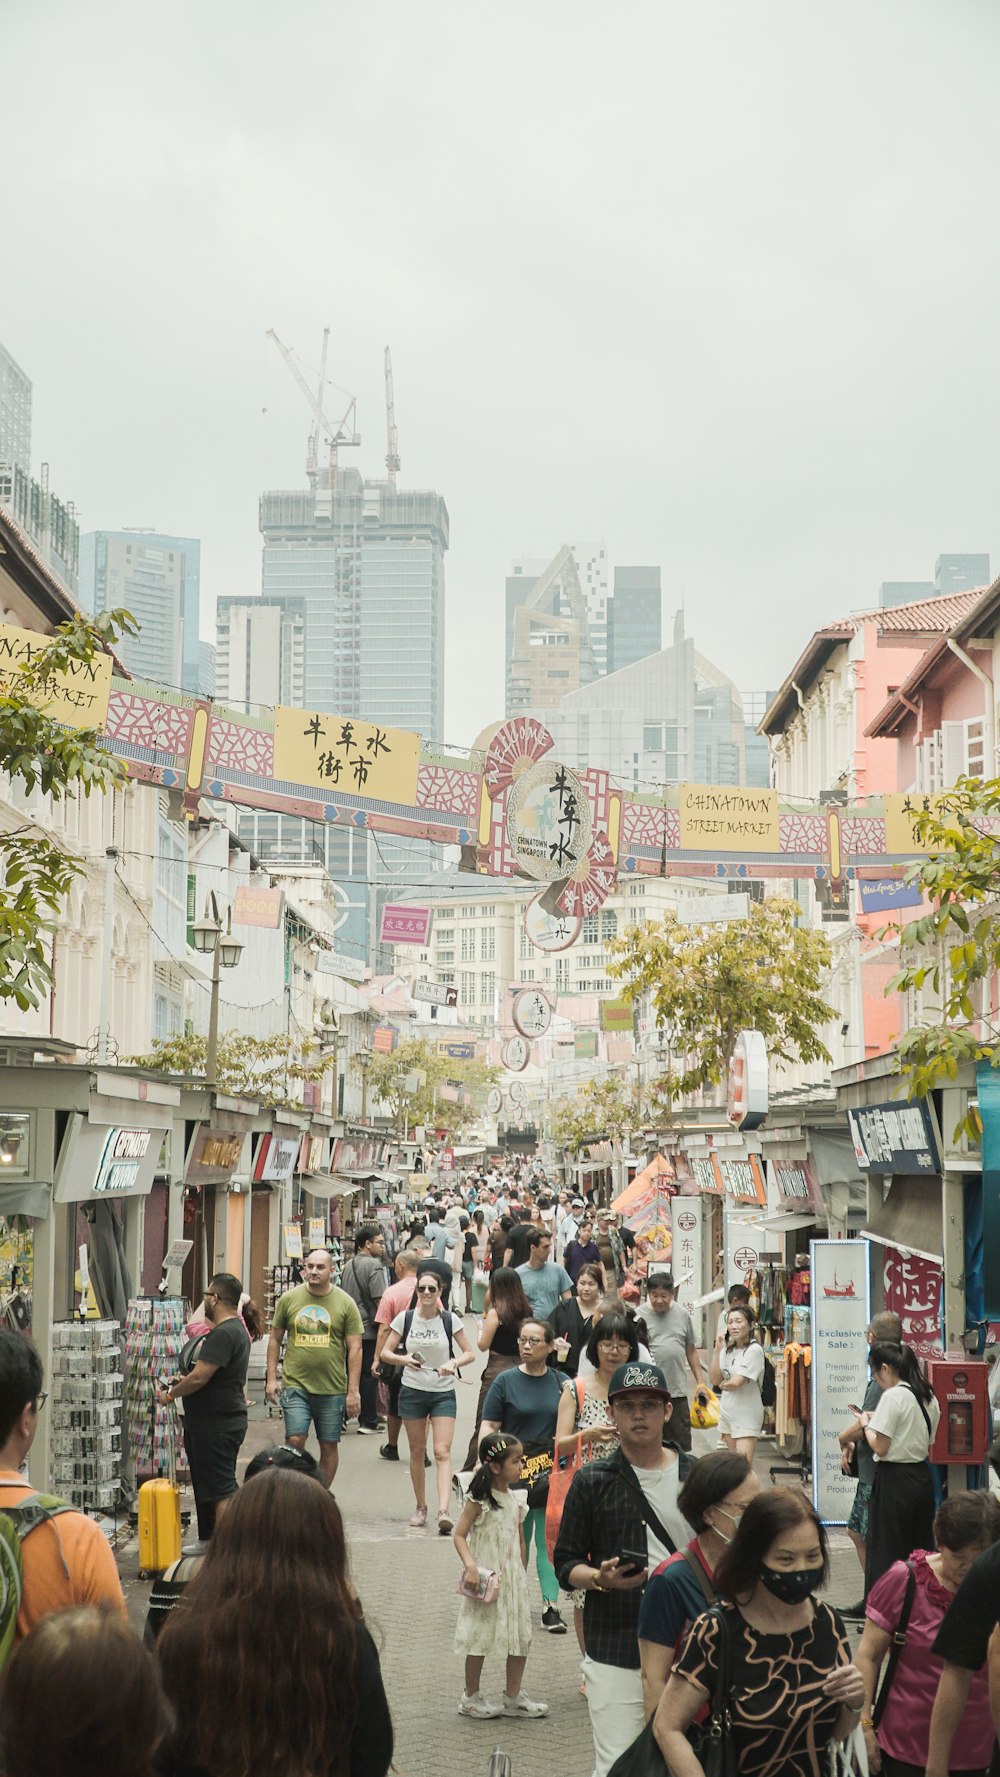 a crowd of people walking down a street next to tall buildings